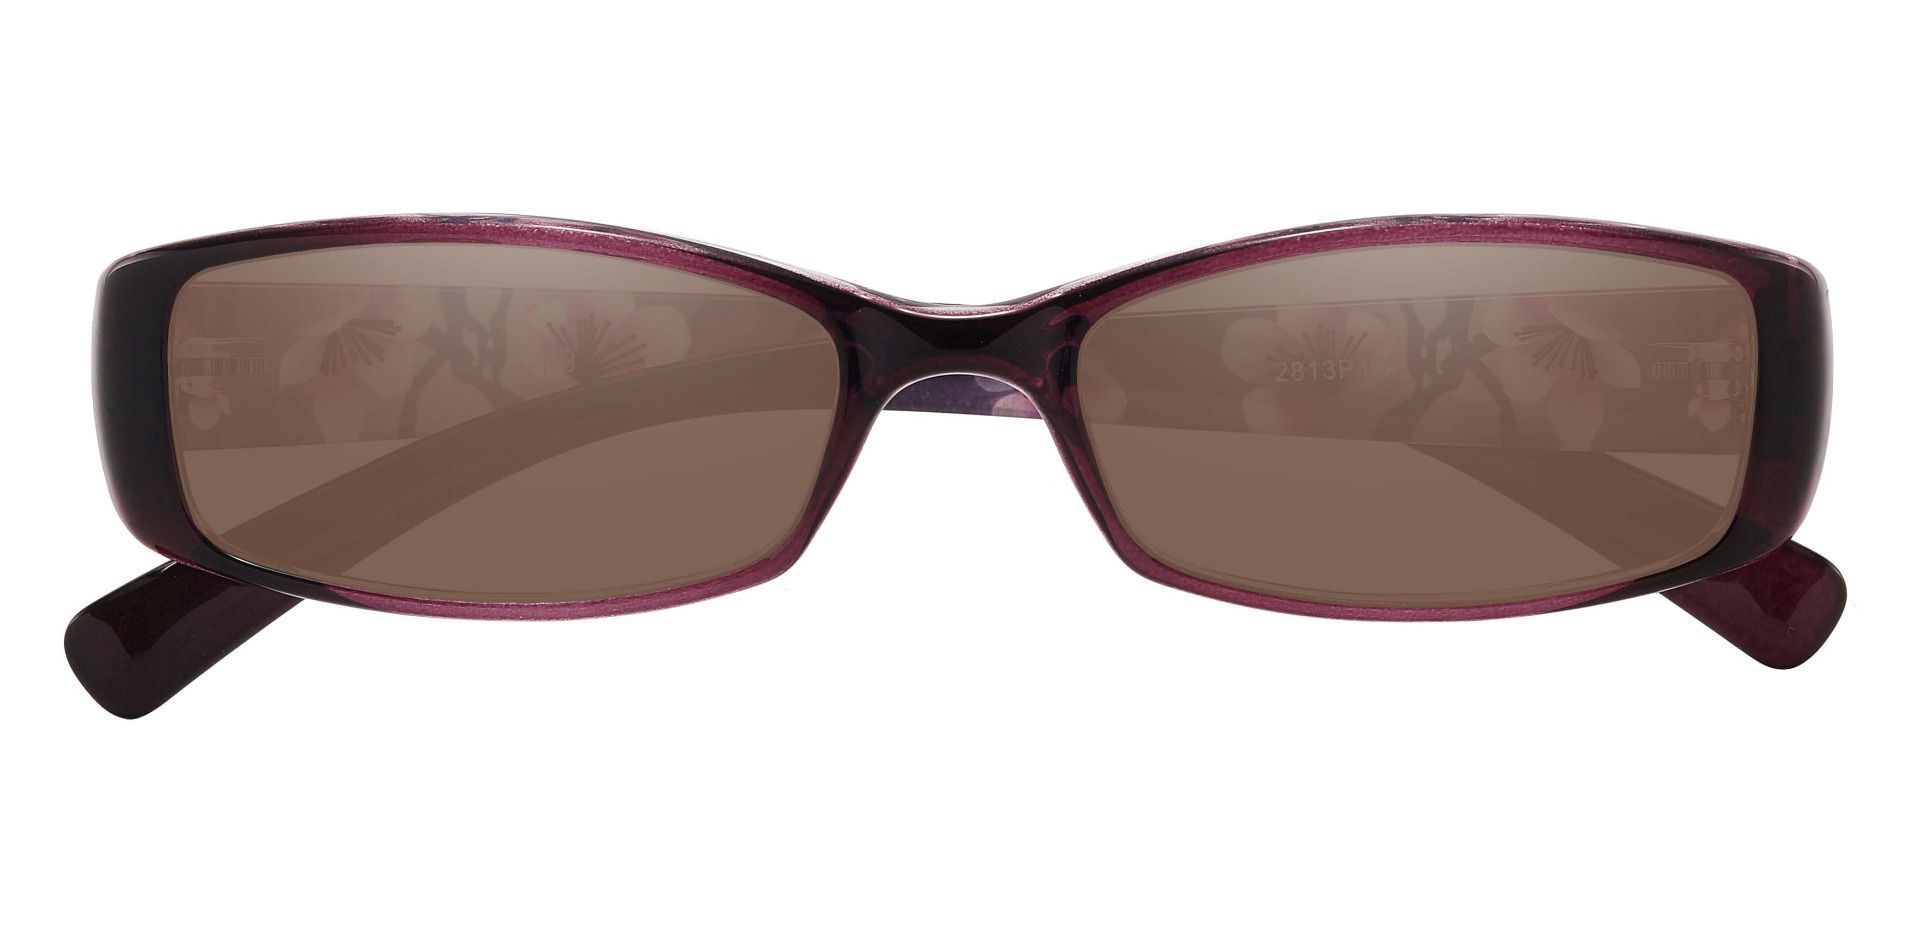 Medora Rectangle Non-Rx Sunglasses - Purple Frame With Brown Lenses